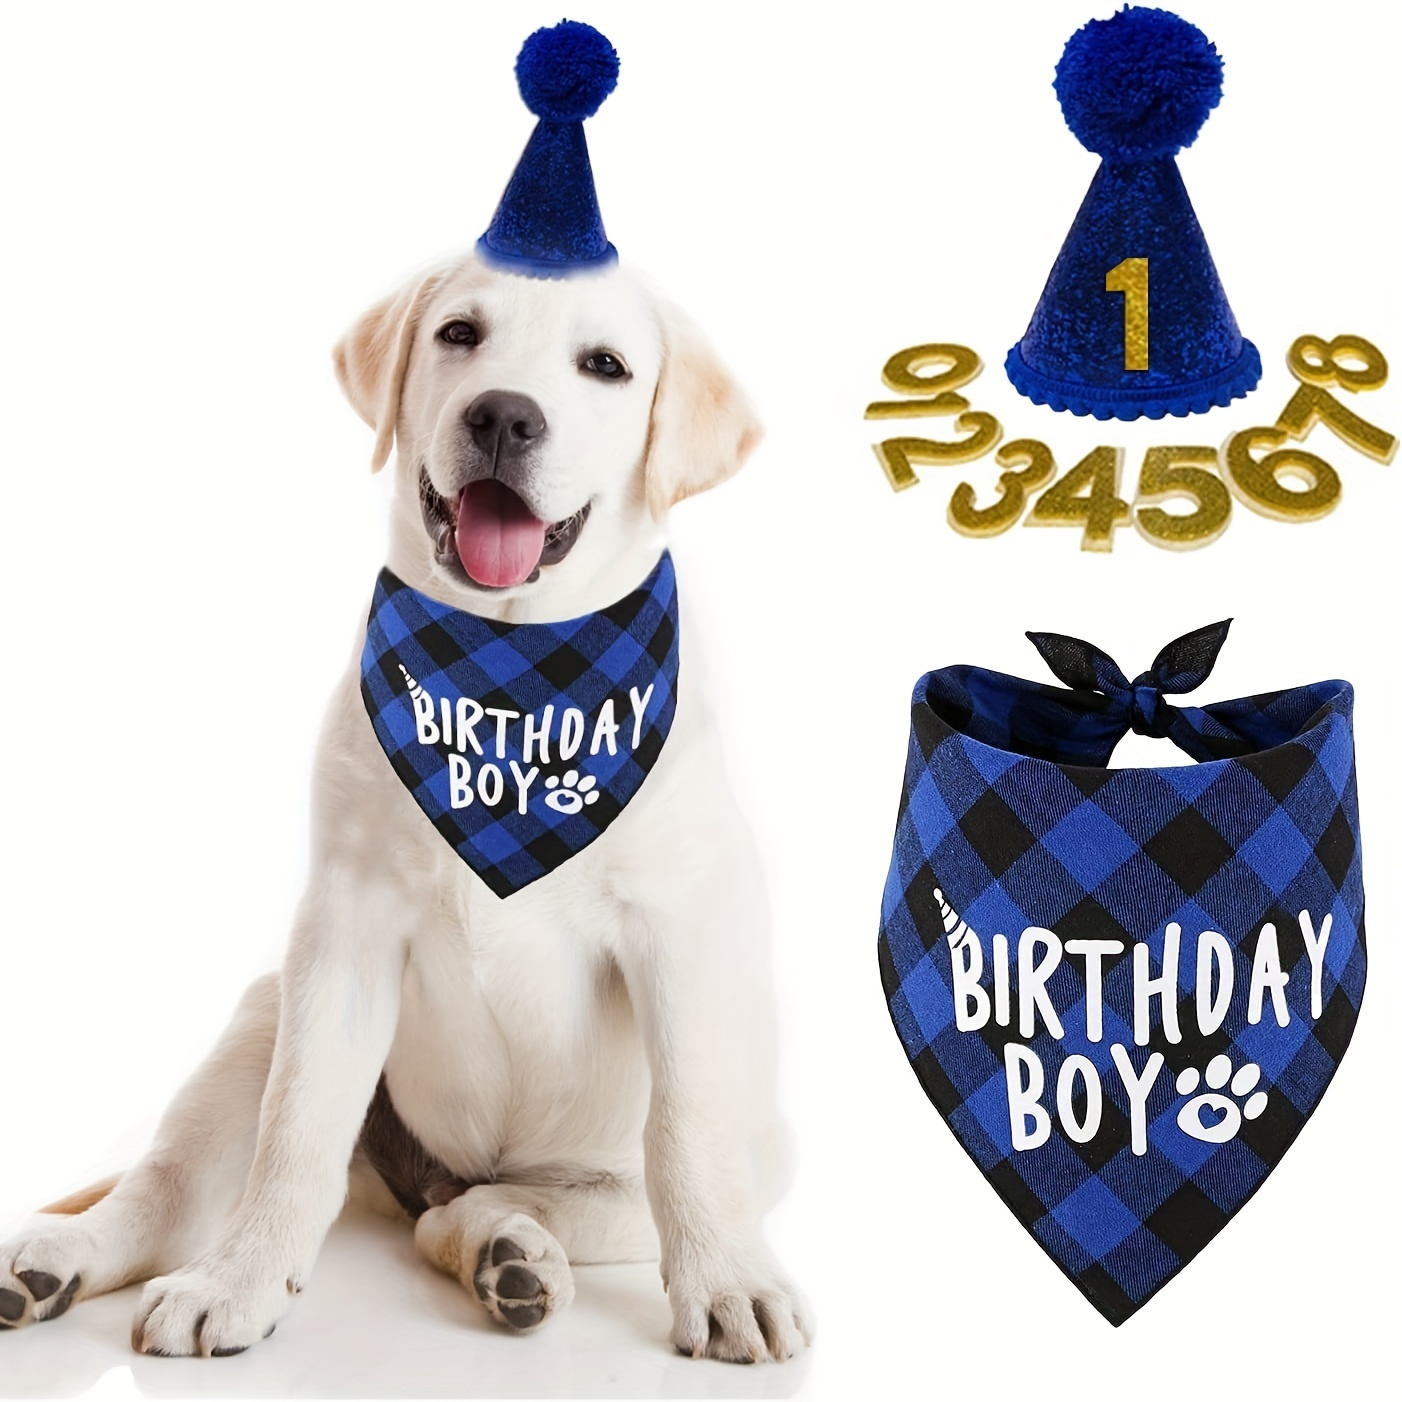 

Make Your Pet's Birthday Special With This Adorable Blue Bandana Scarf & Party Hat Set!